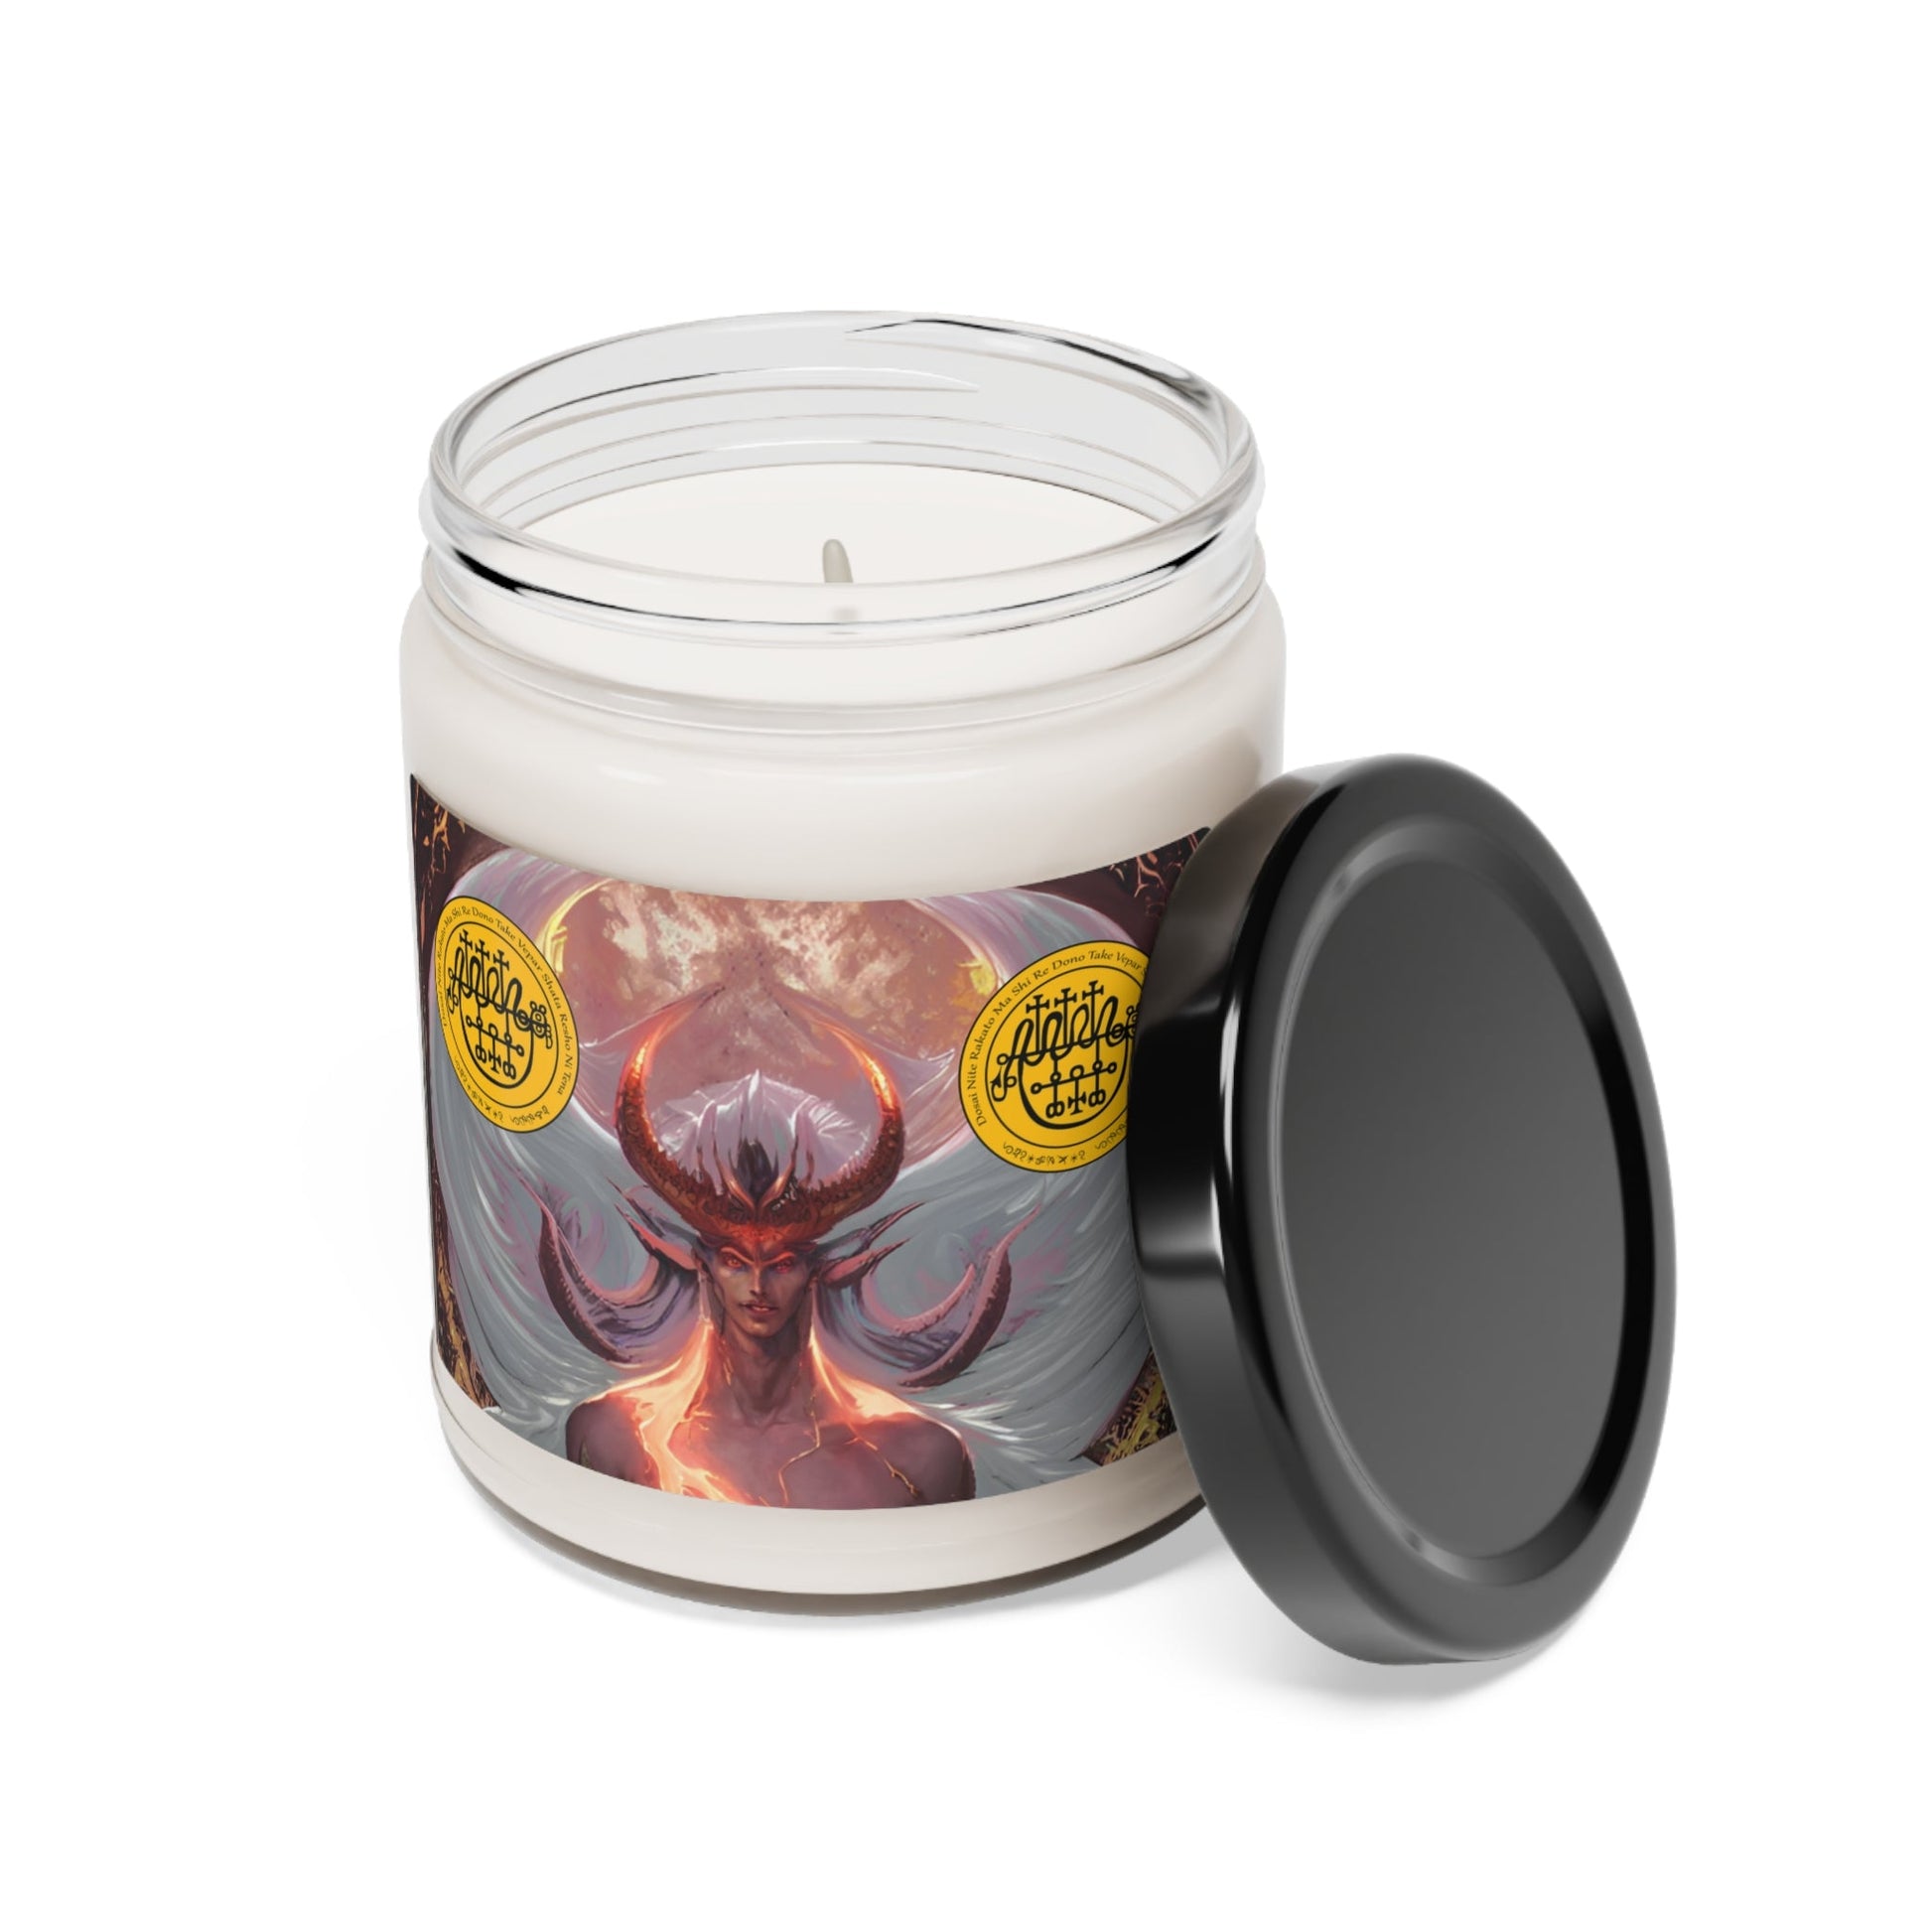 Demon-Vepar-Altar-Scented-Soy-Candle-for-offerings-rituals-initiations-o-praying-and-medtation-7